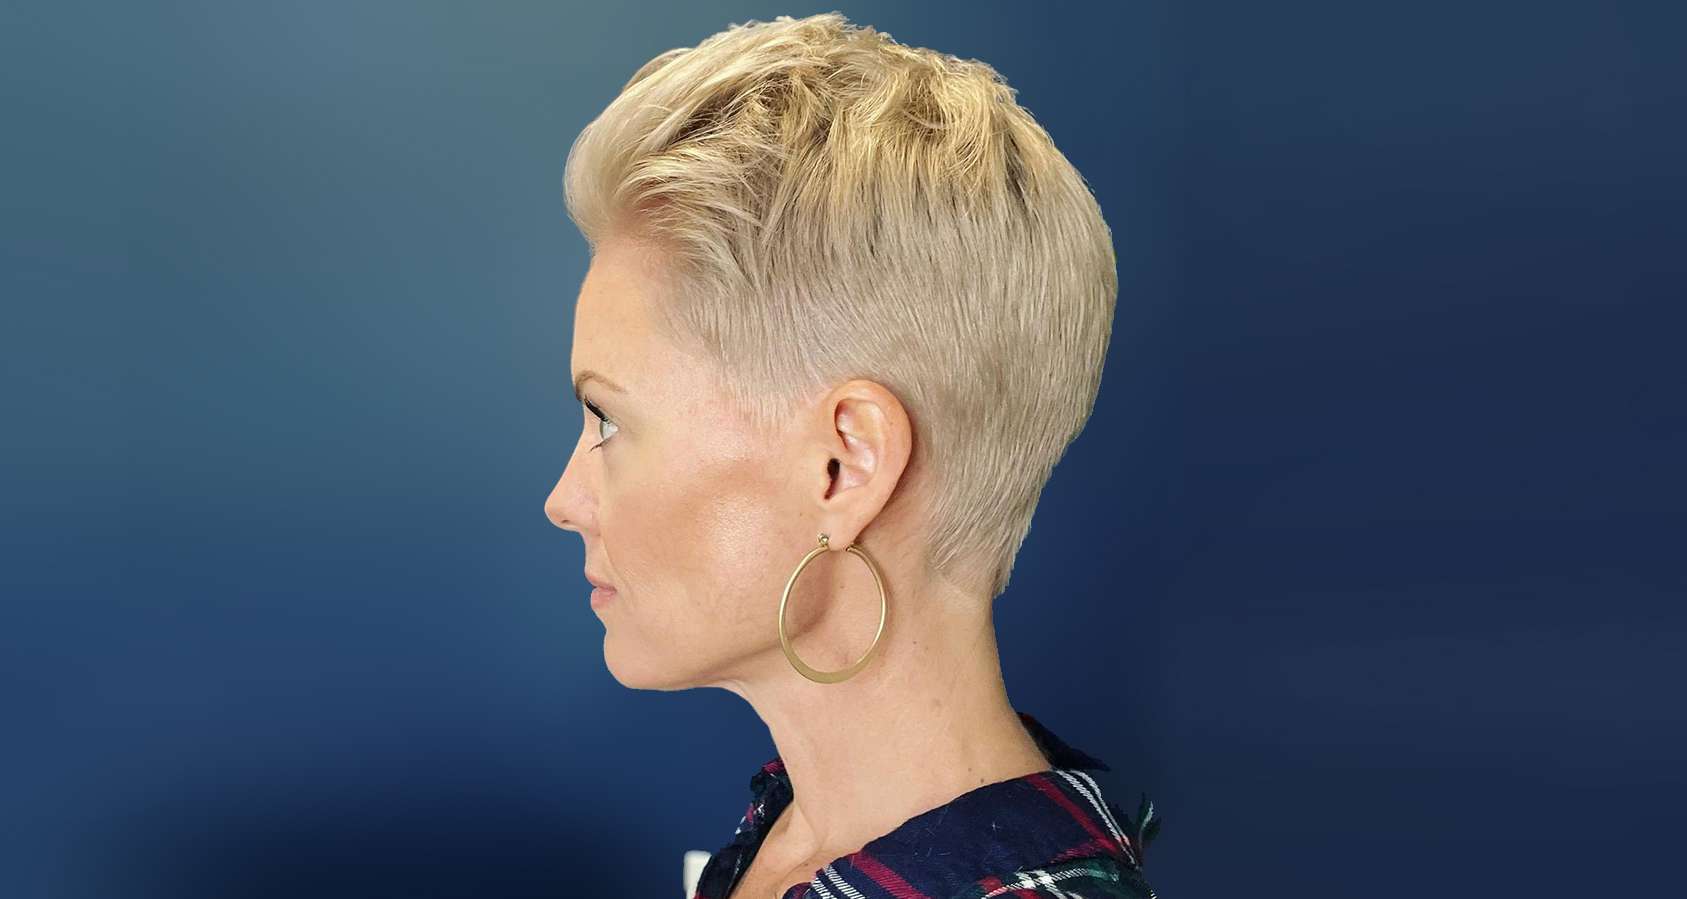 Shannon Carver Short Hairstyles - 1